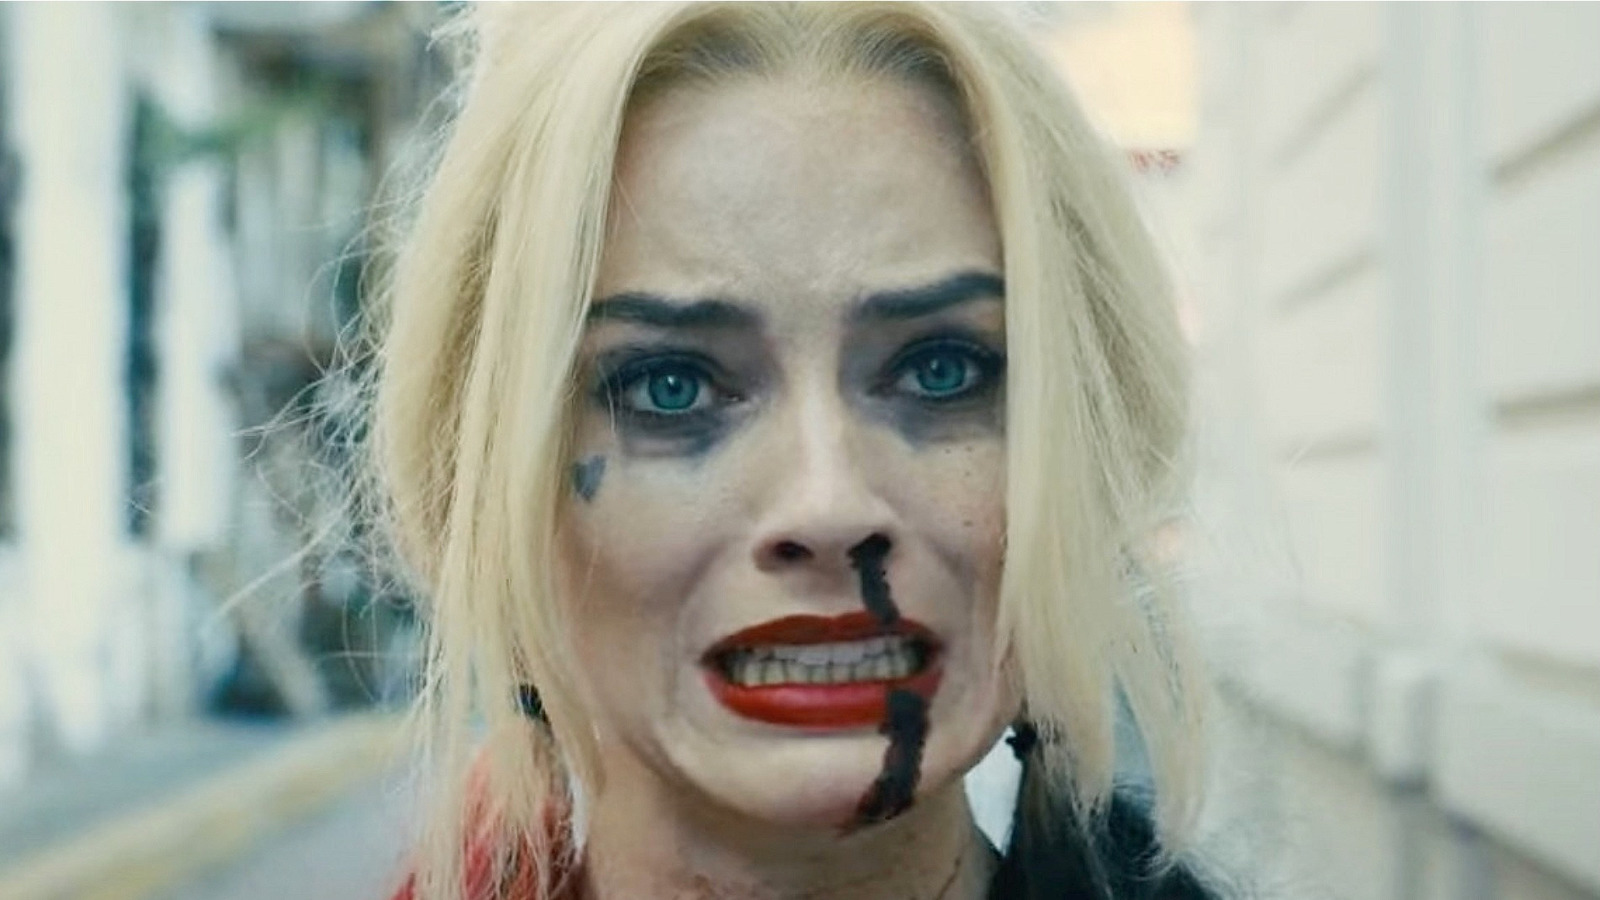 Who plays Harley Quinn in Suicide Squad 2?